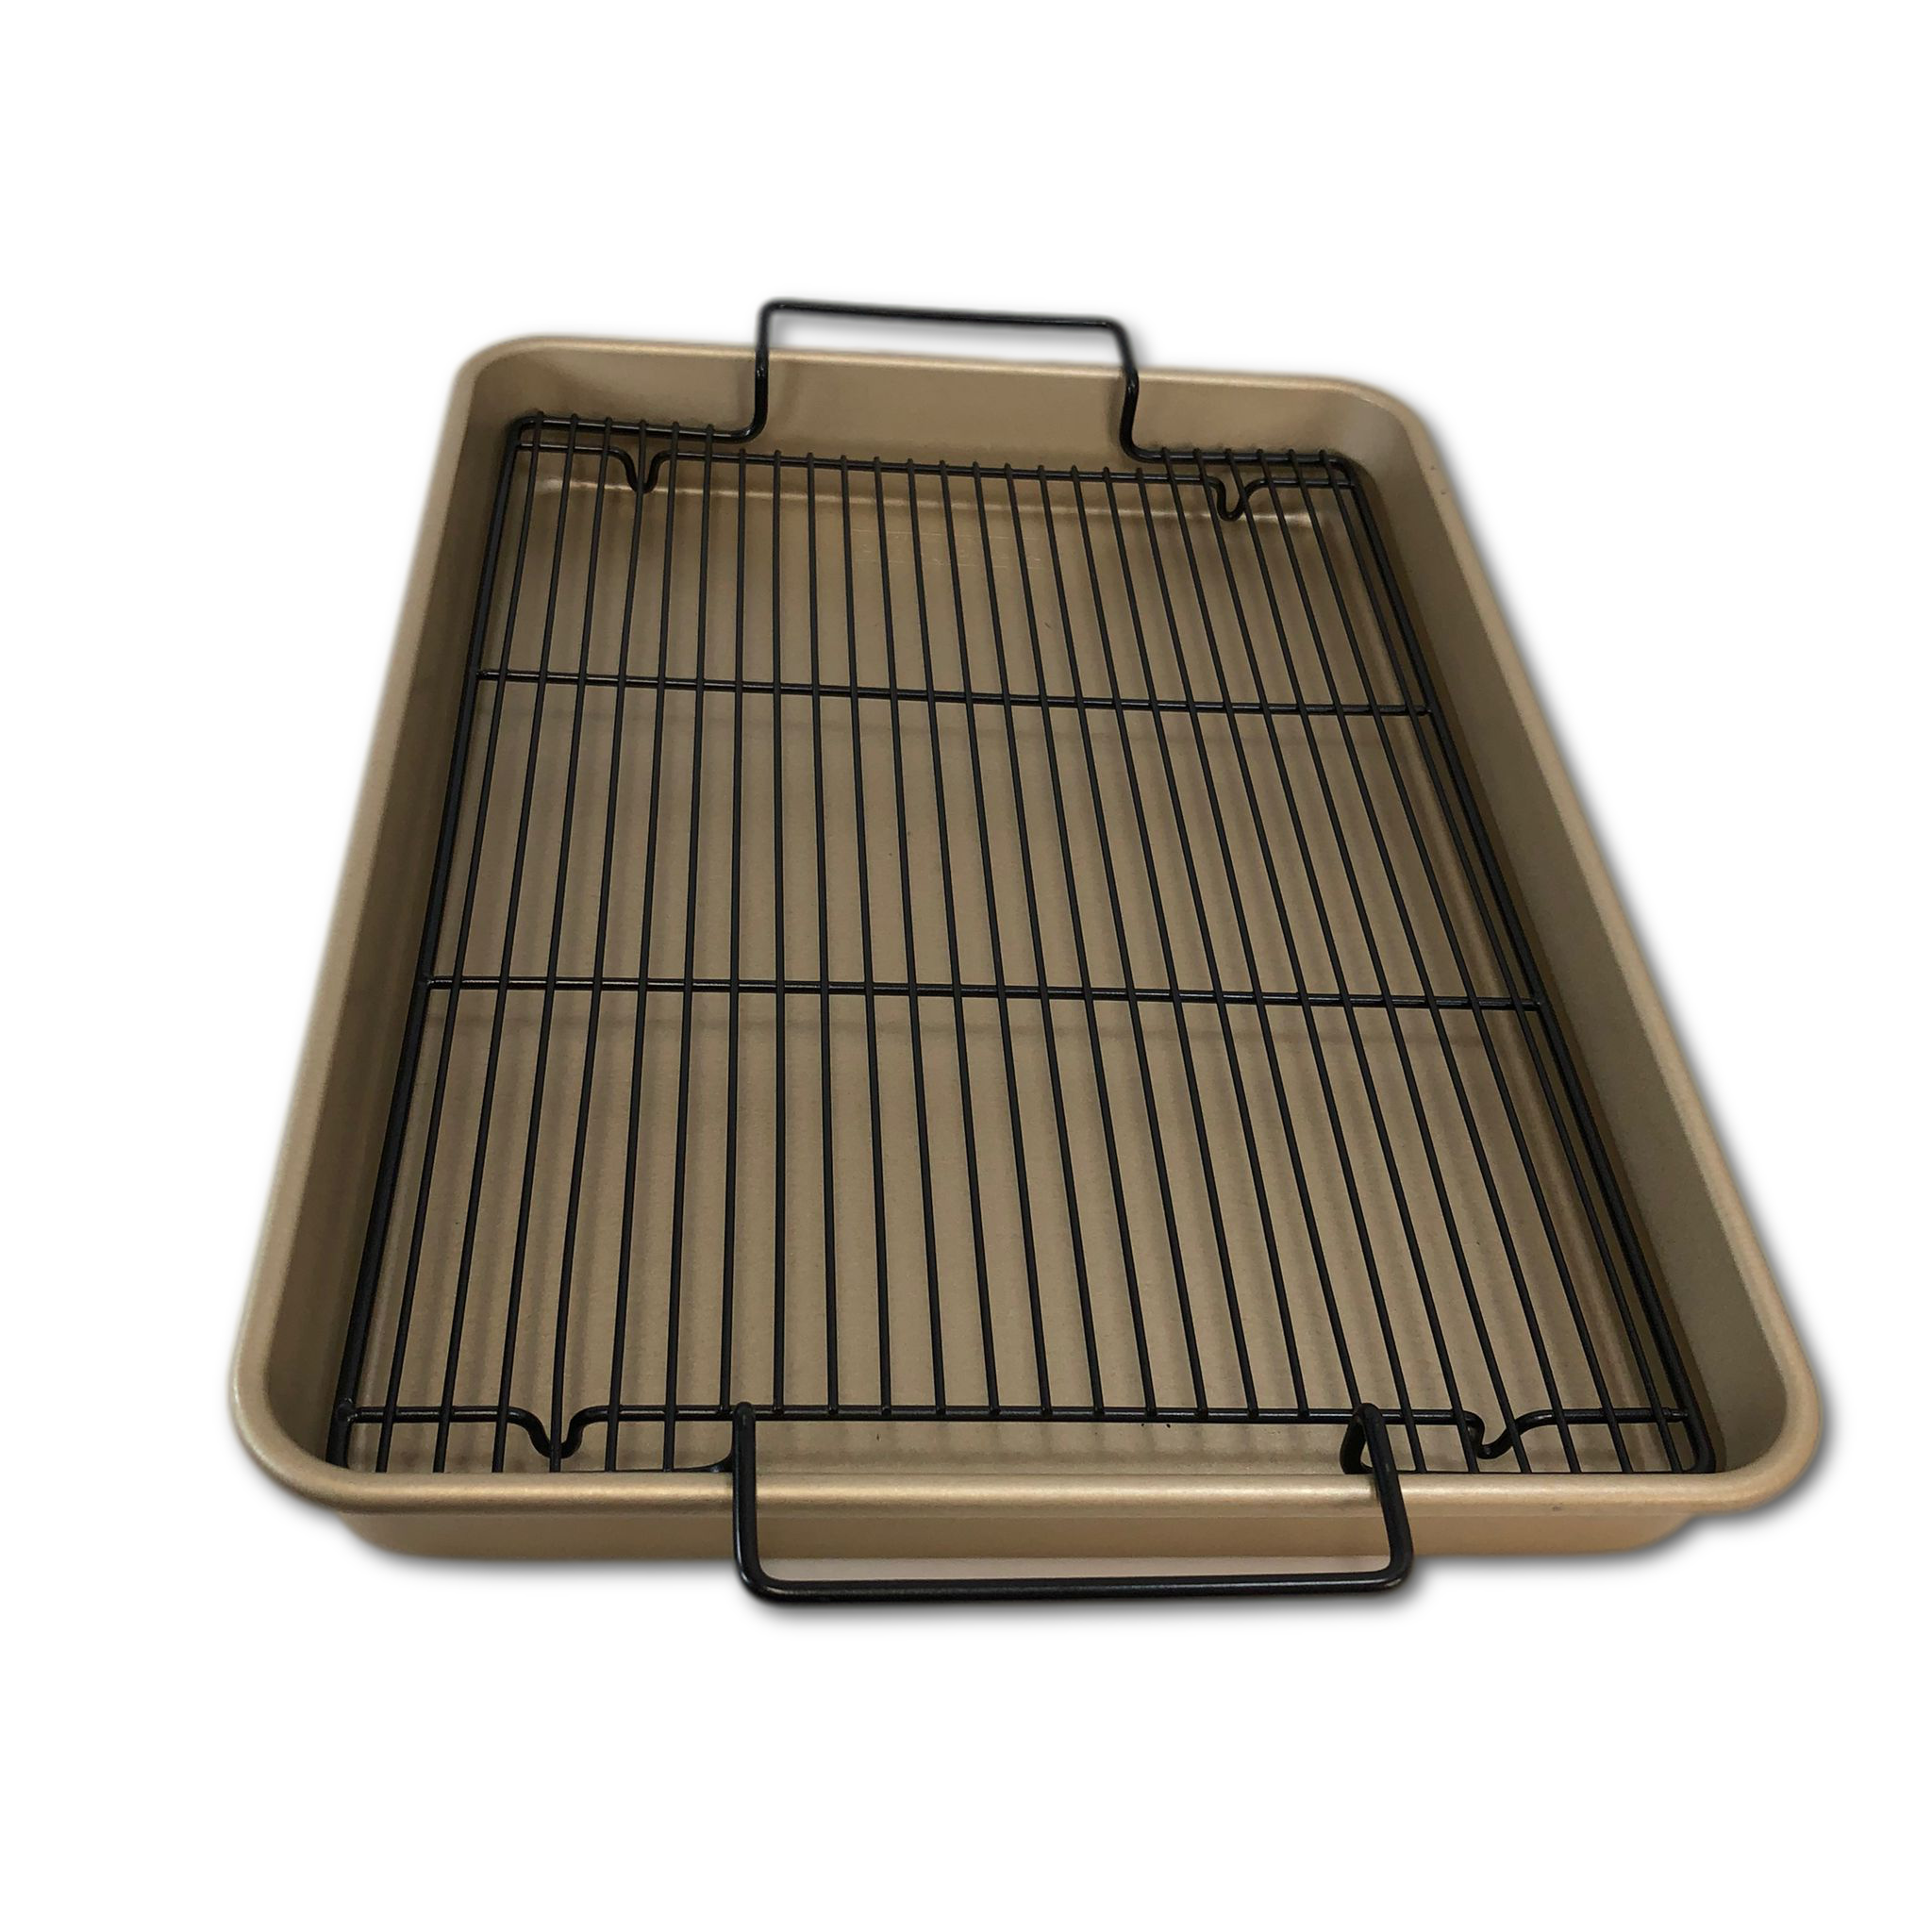 https://www.wholesalebidder.com/cdn/shop/products/As_20is_20Nordic_20Ware_20Gold_20High_20Sided_20Half_20Sheet_20with_20Wire_20Rack_b1cf7f22-6334-424a-a220-99e6deb5133f.png?v=1654935719